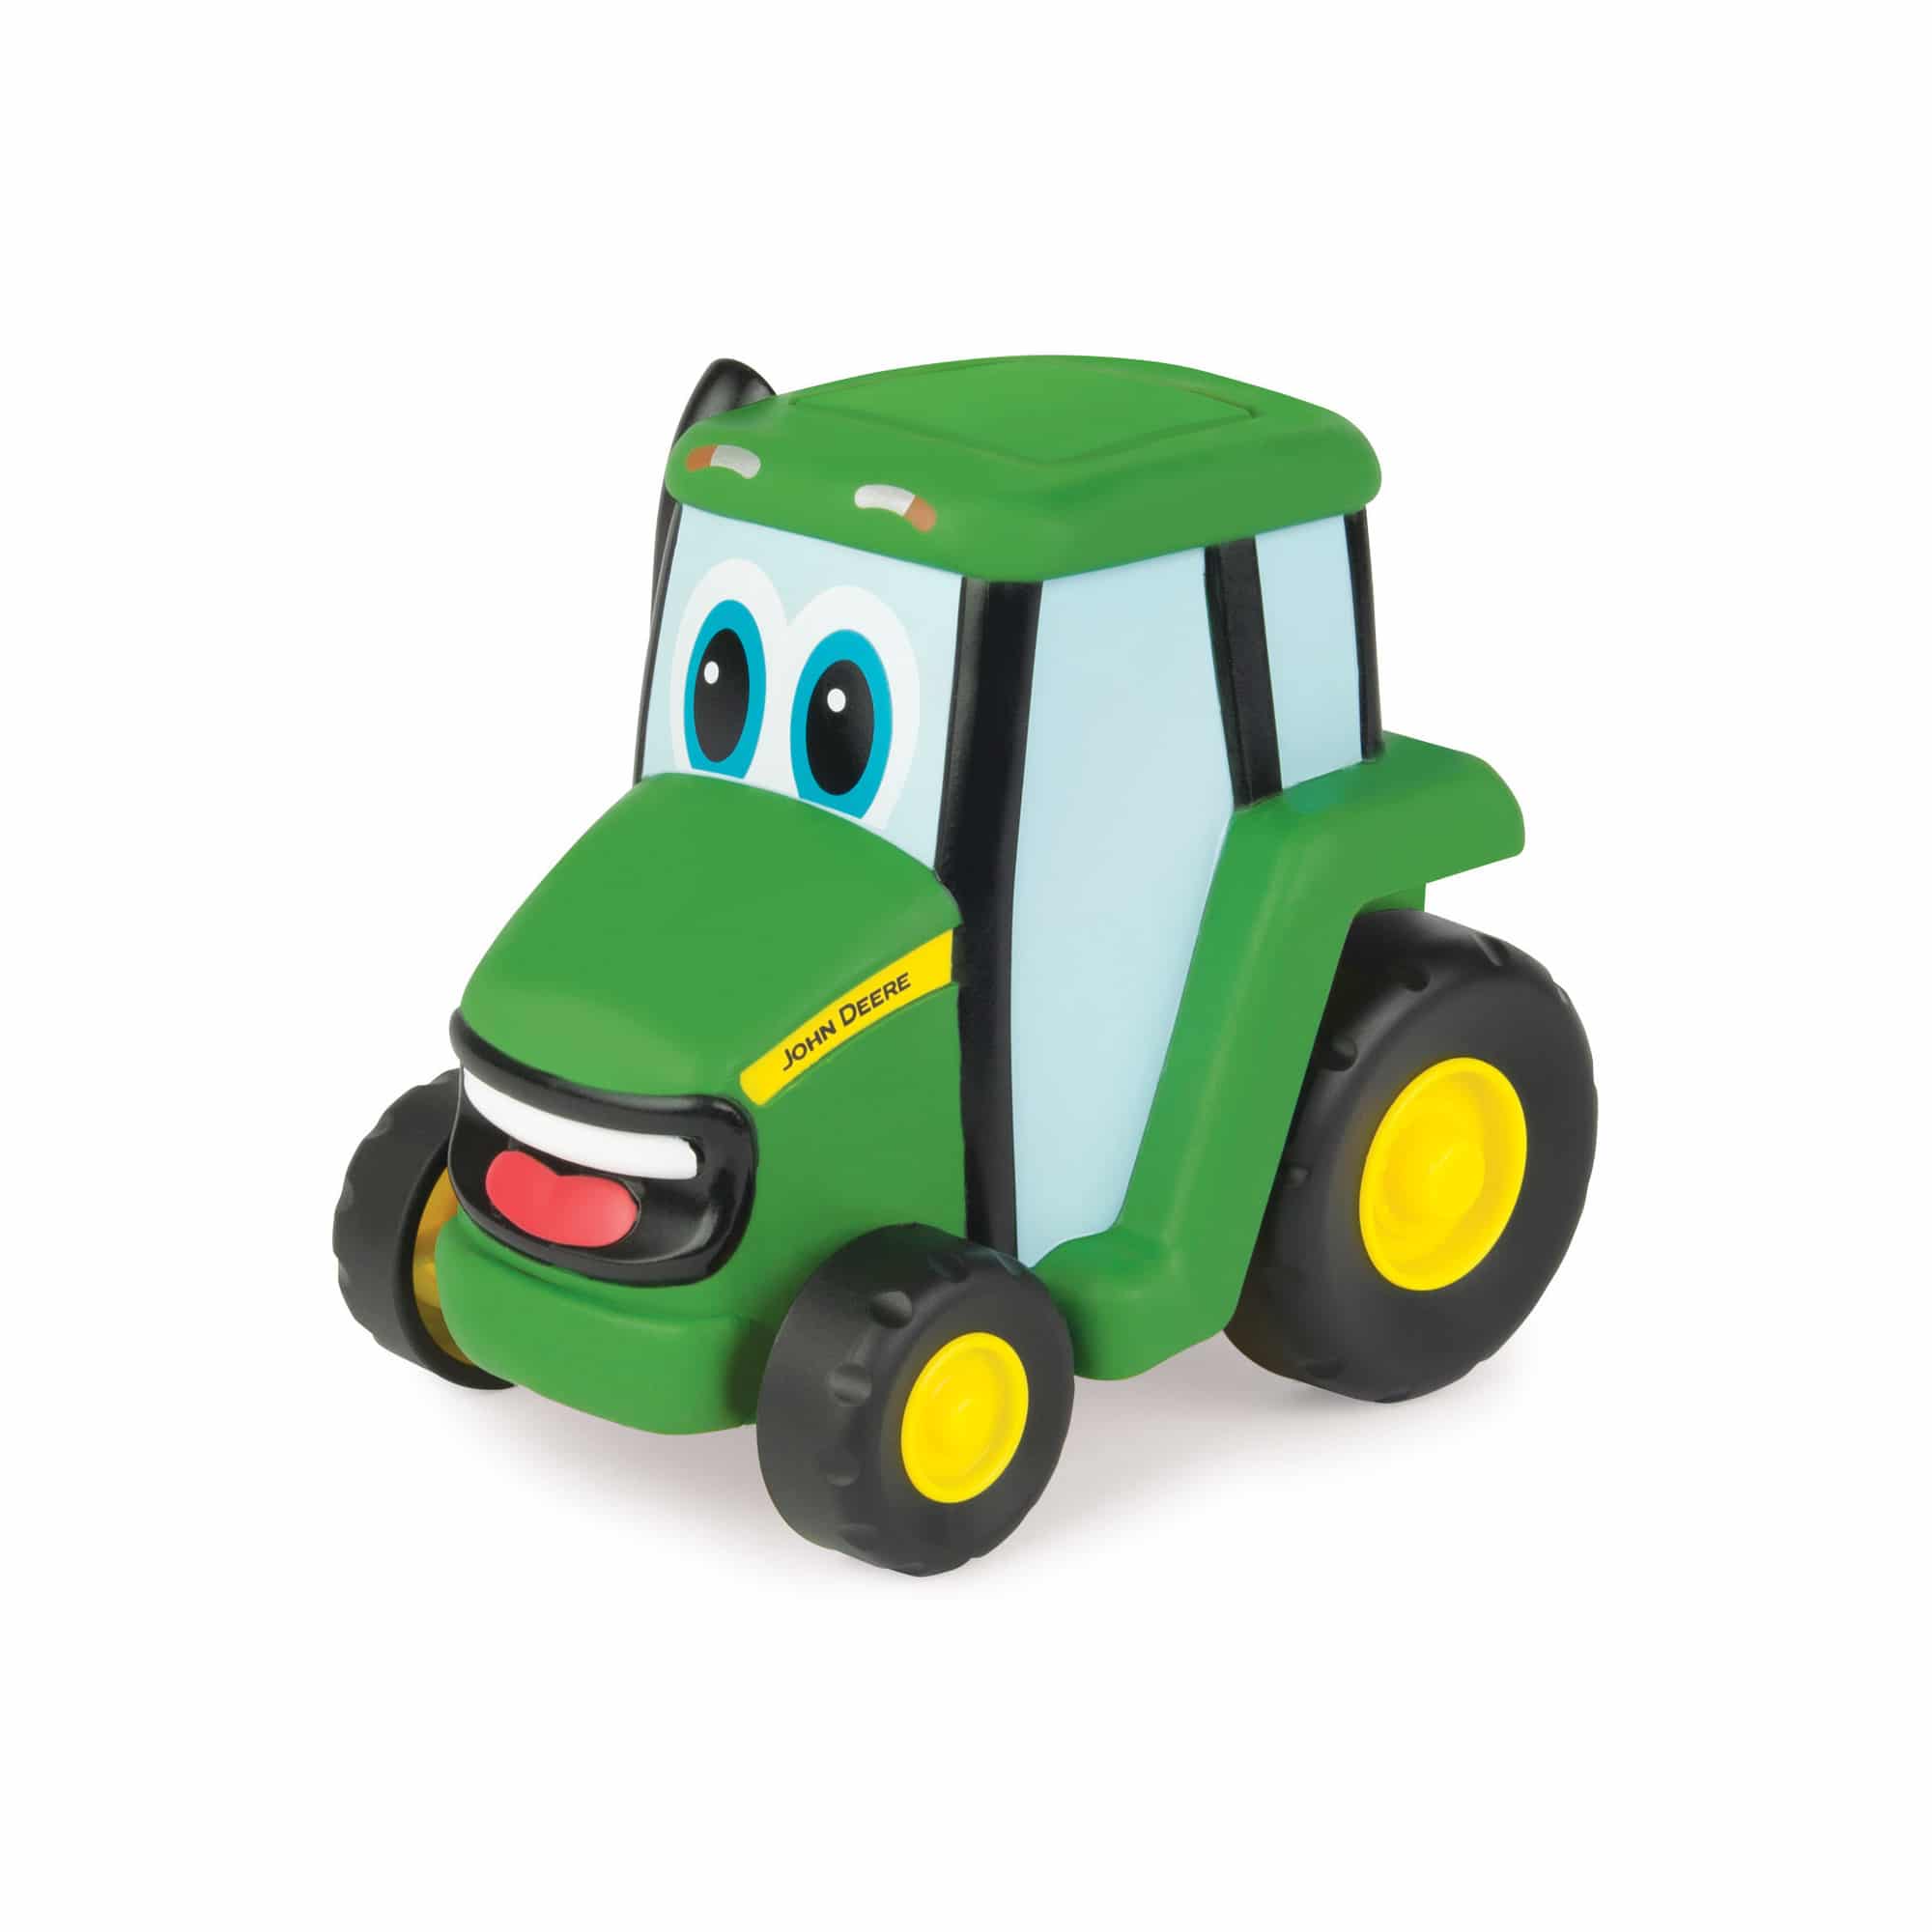 TOMY John Deere Build a Johnny Tractor Kids' Toy